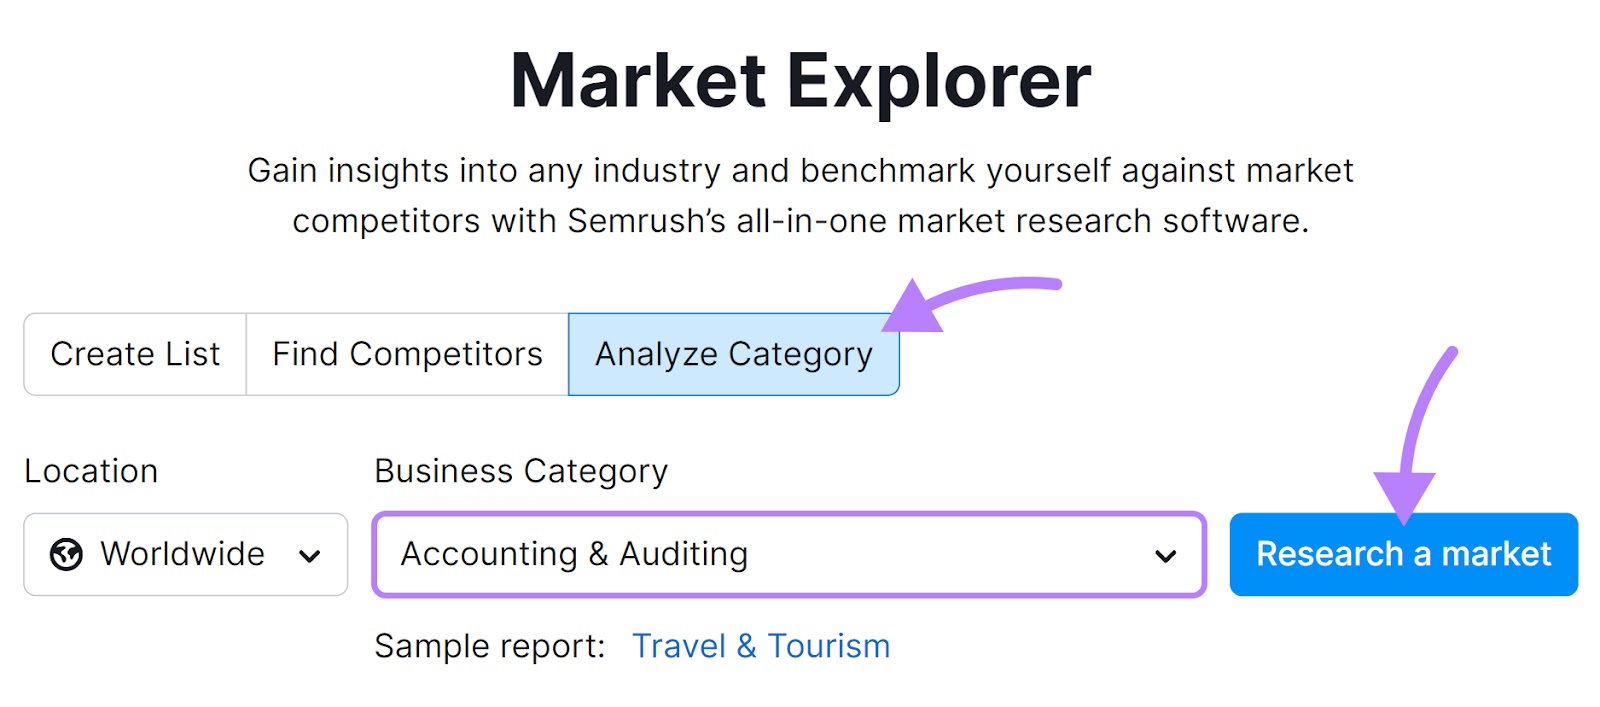 "Accounting & Auditing" class  entered into the Market Explorer